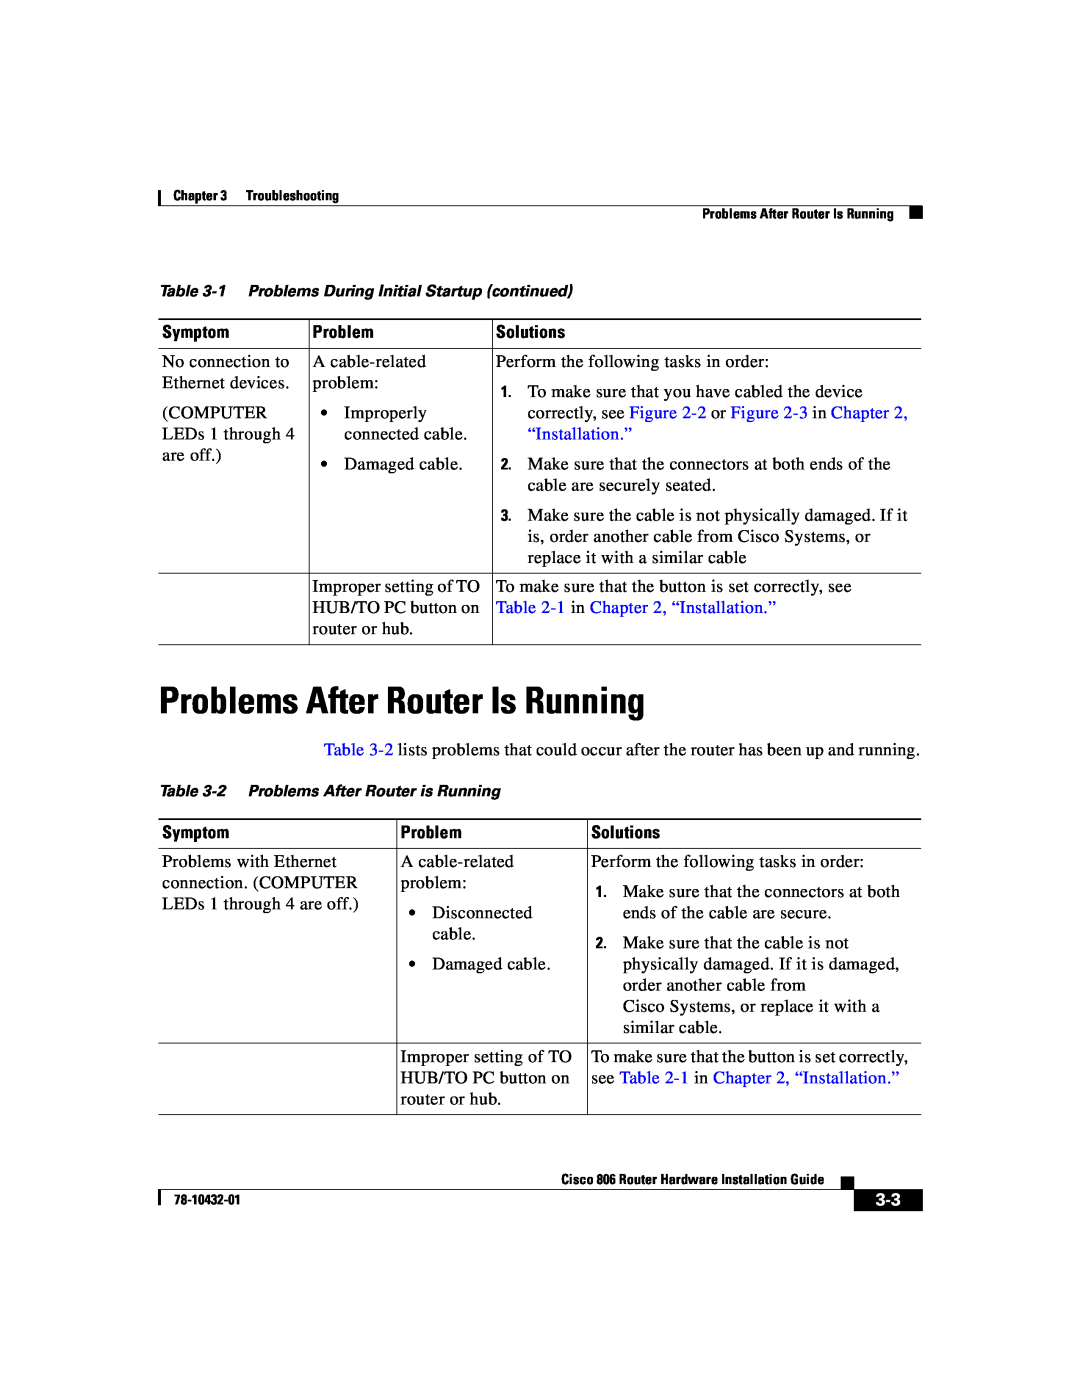 Cisco Systems 806 manual Problems After Router Is Running, correctly, see -2 or -3 in Chapter, 1 in , “Installation.” 